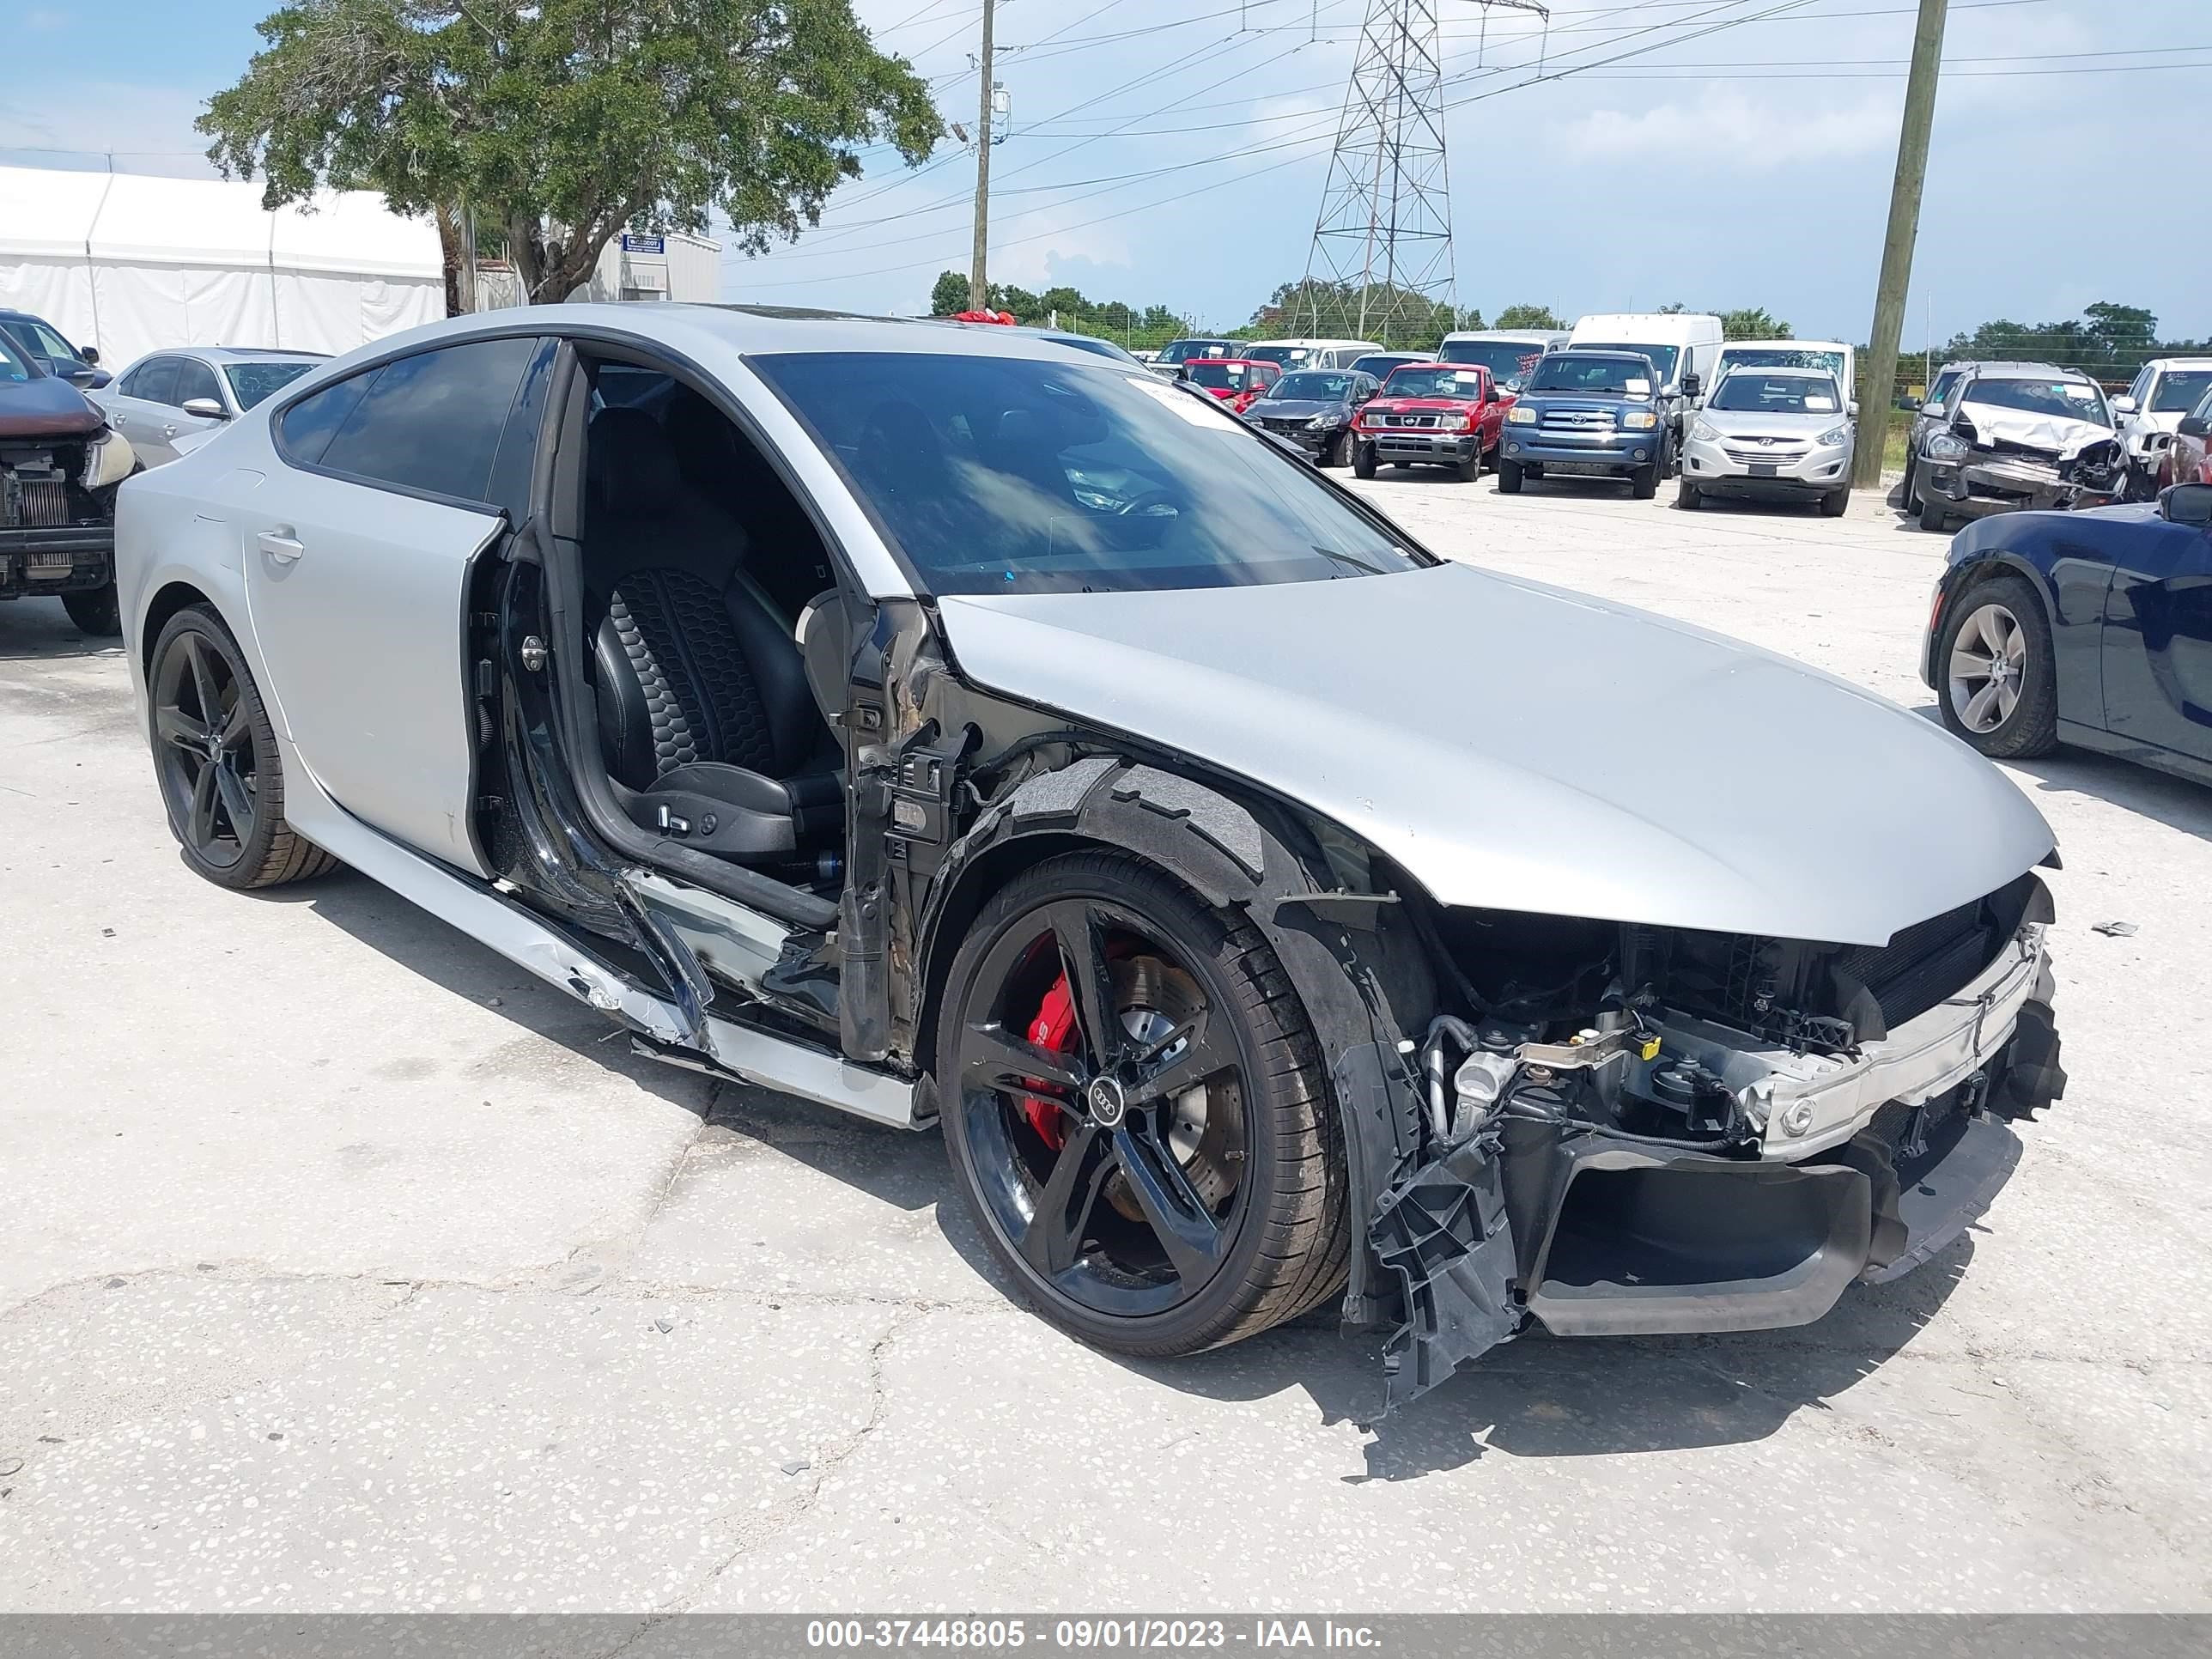 vin: WUAW2AFC4GN902078 WUAW2AFC4GN902078 2016 audi rs7 4000 for Sale in 33760, 5152 126Th Ave N, Clearwater, Florida, USA